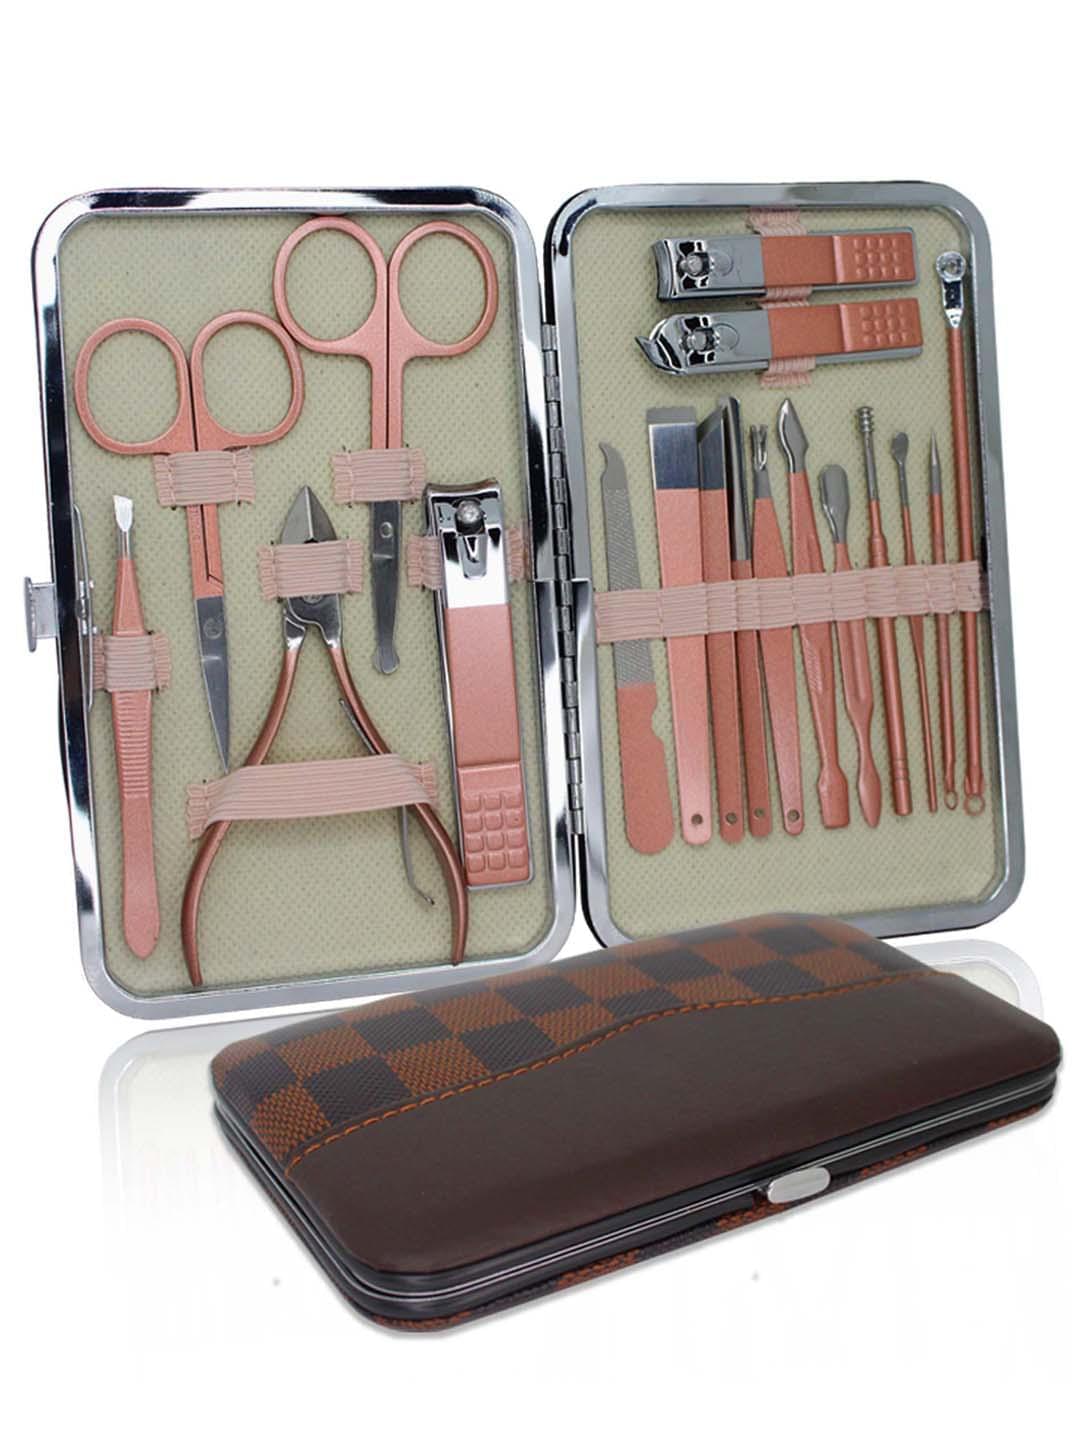 Lick Manicure Kit, Pedicure Tools For Feet, Nail Clipper, Manicure Pedicure Kit For Women And Men, 18 Pieces, Rose Gold